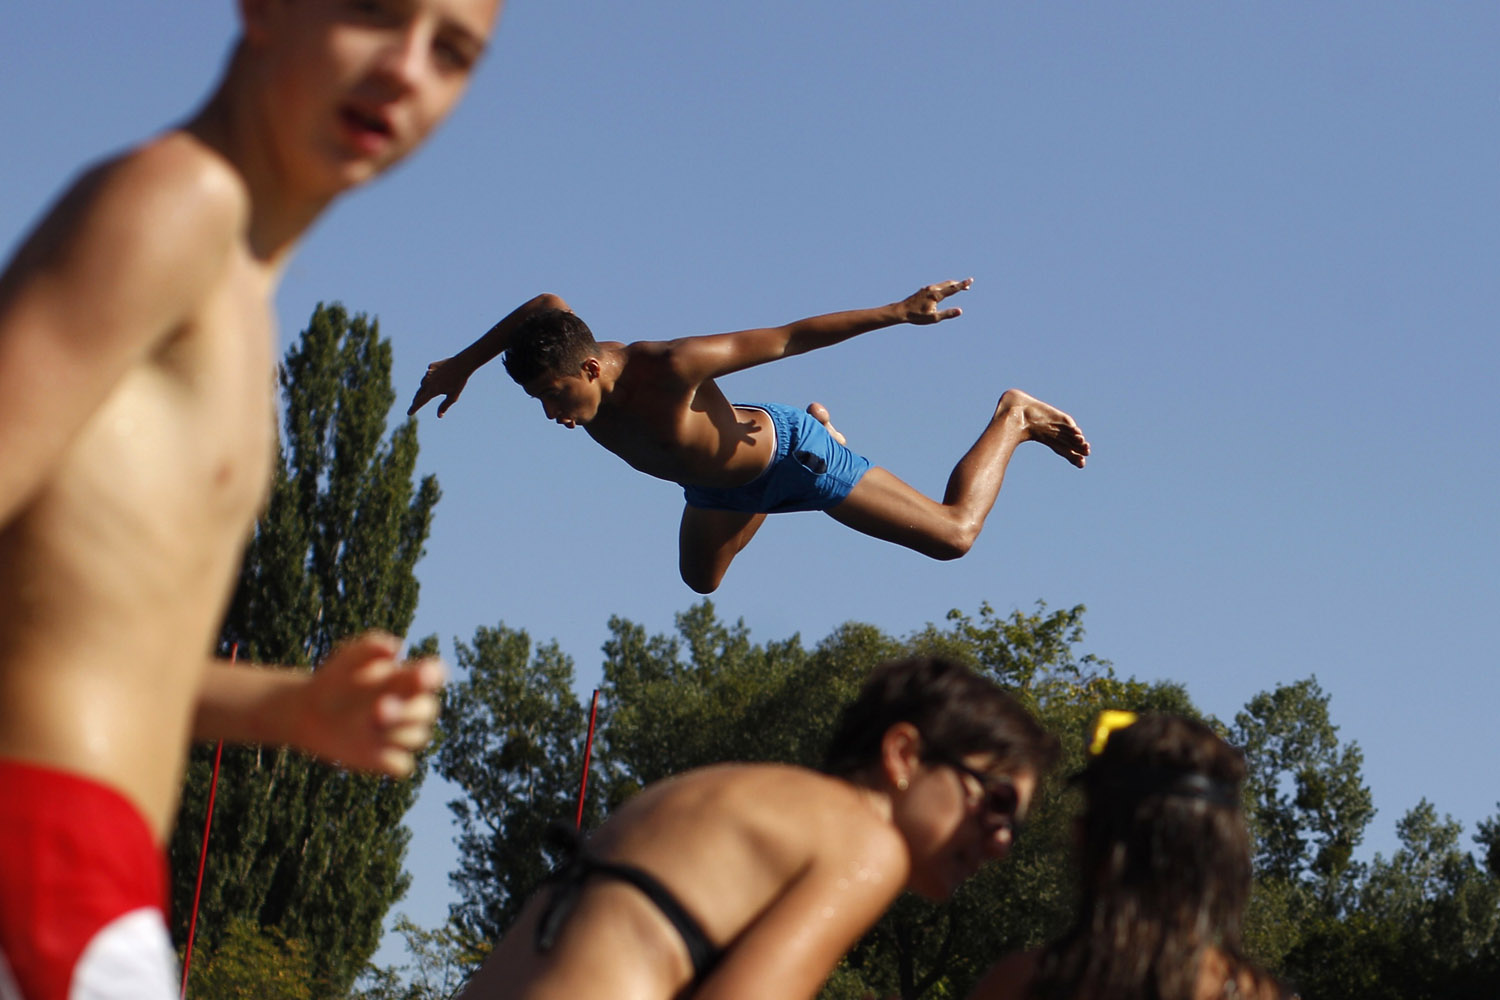 Aug. 20, 2012. A youth jumps from a diving platform at Stadionbad, a public outdoor swimming pool, in Vienna.